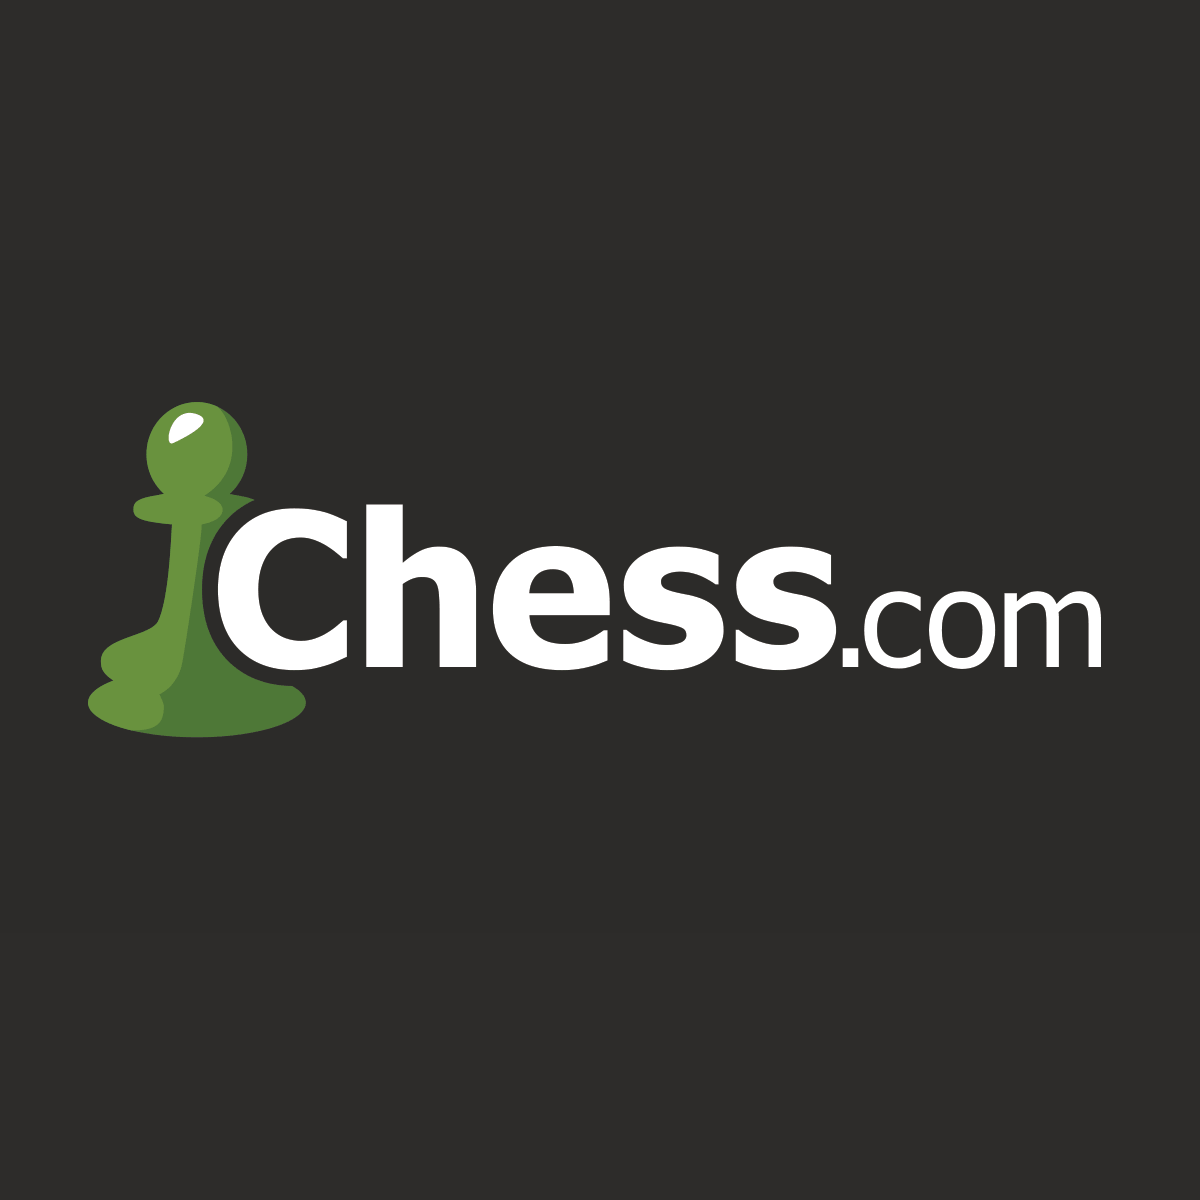 Welcome to my Chess.com ™ Blog! 